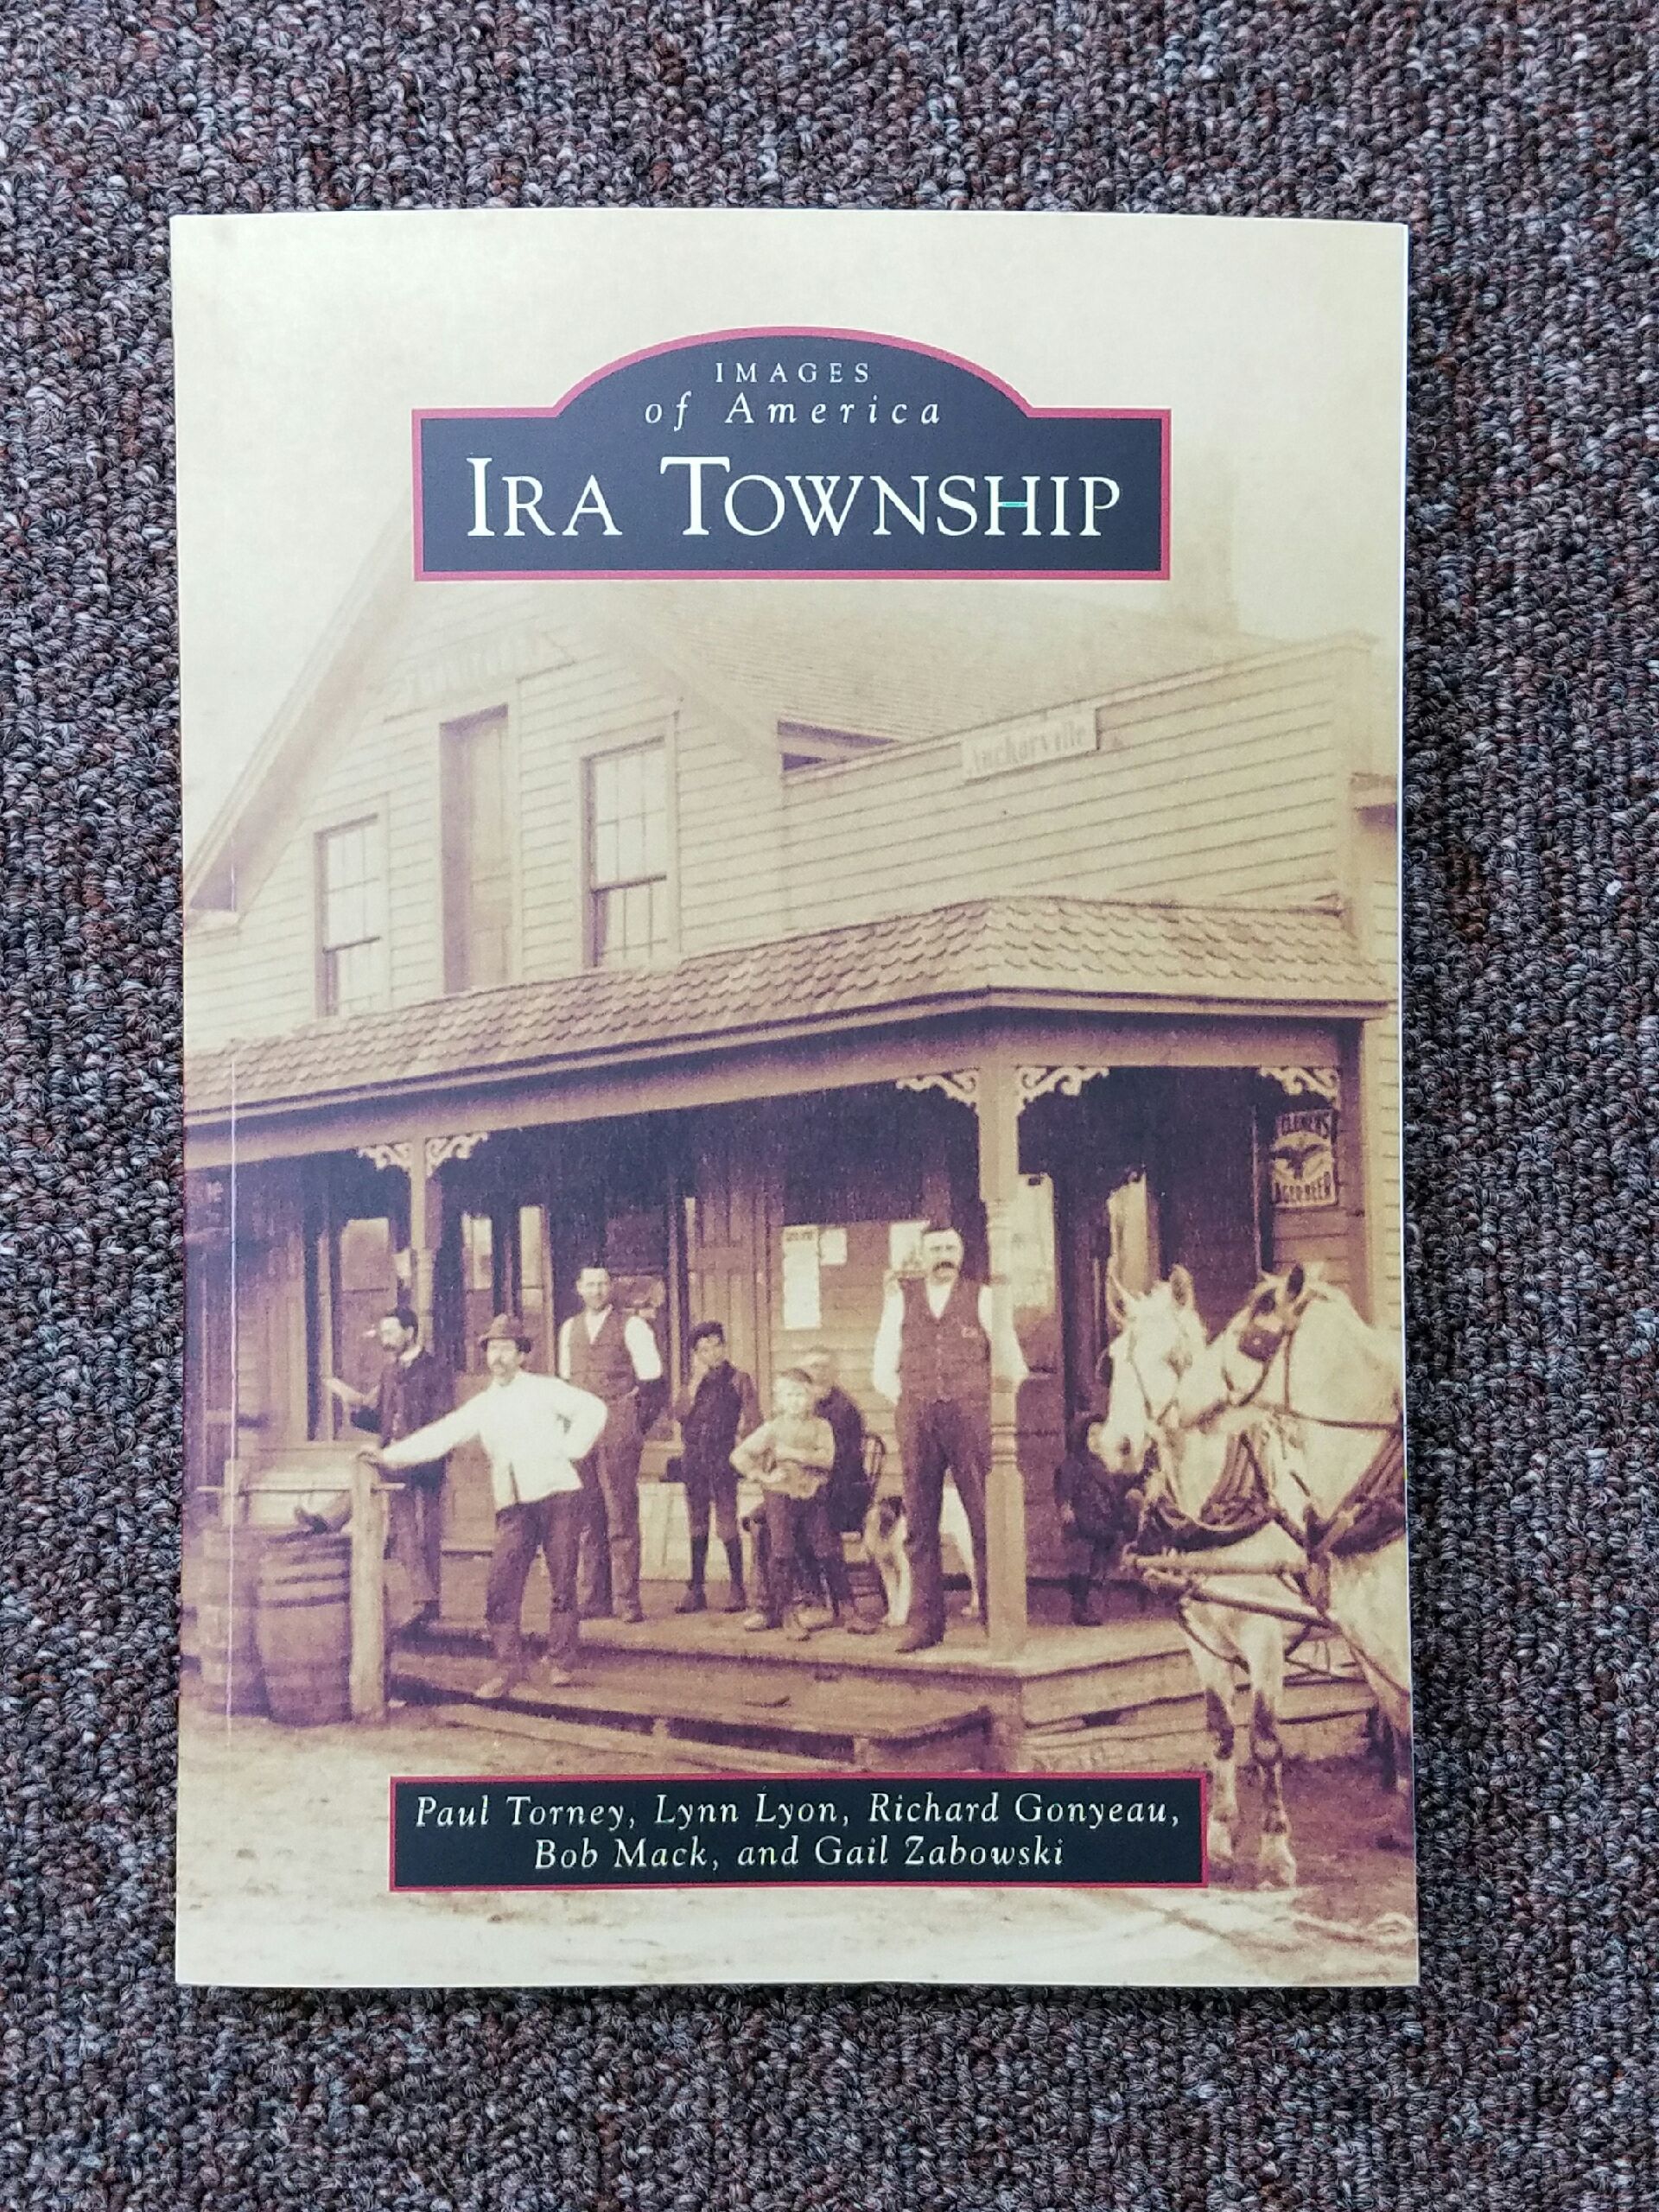 Images of America - IRA TOWNSHIP